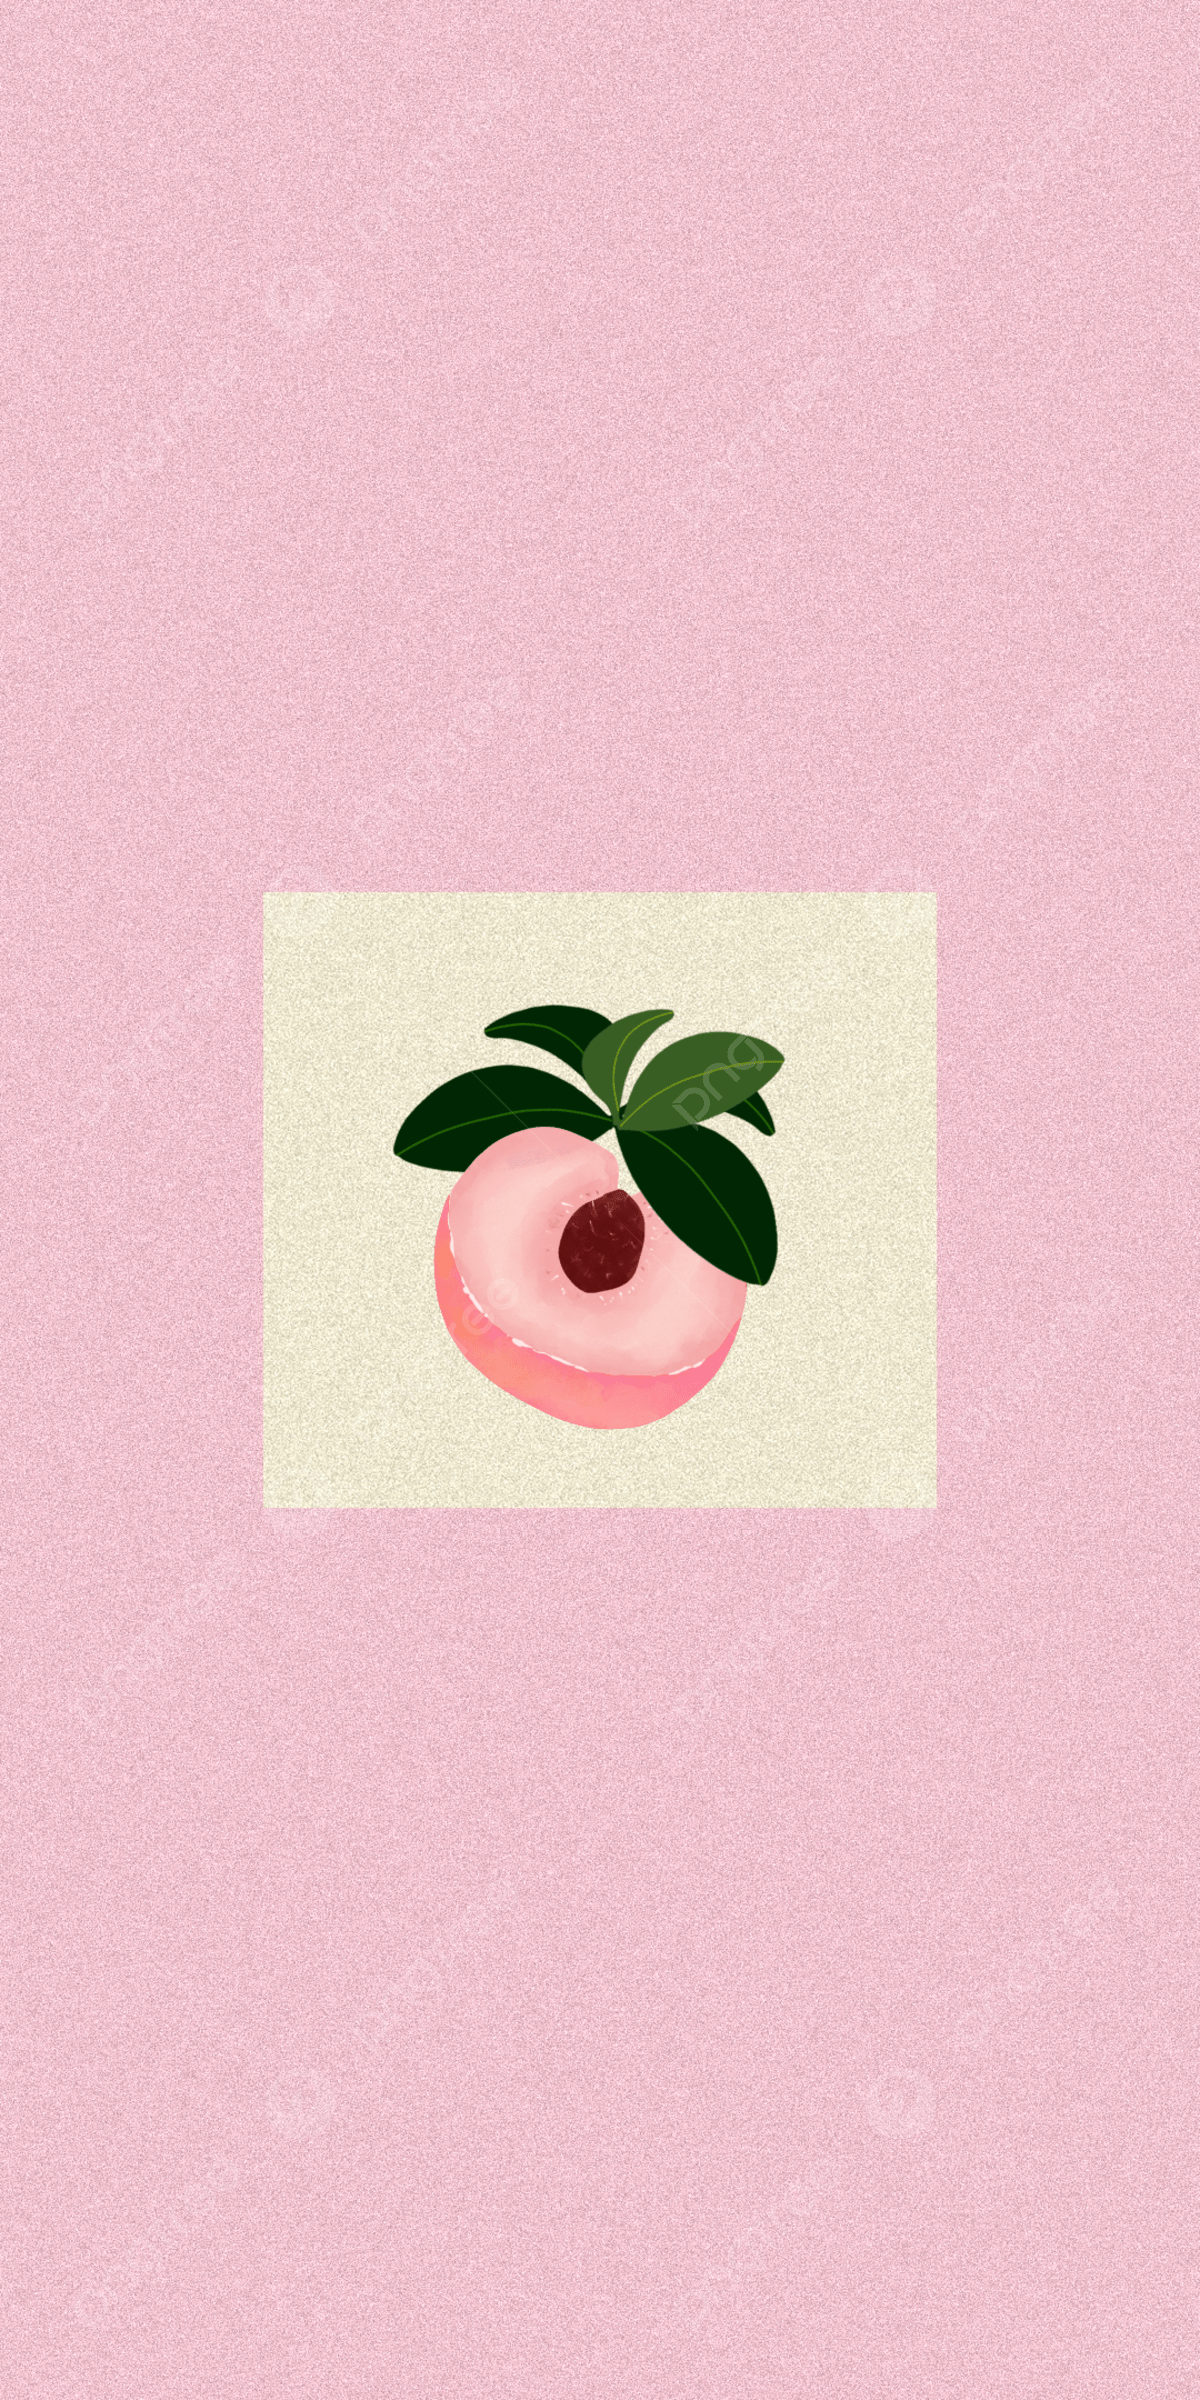 A pink graphic of a doughnut with leaves on top - Peach